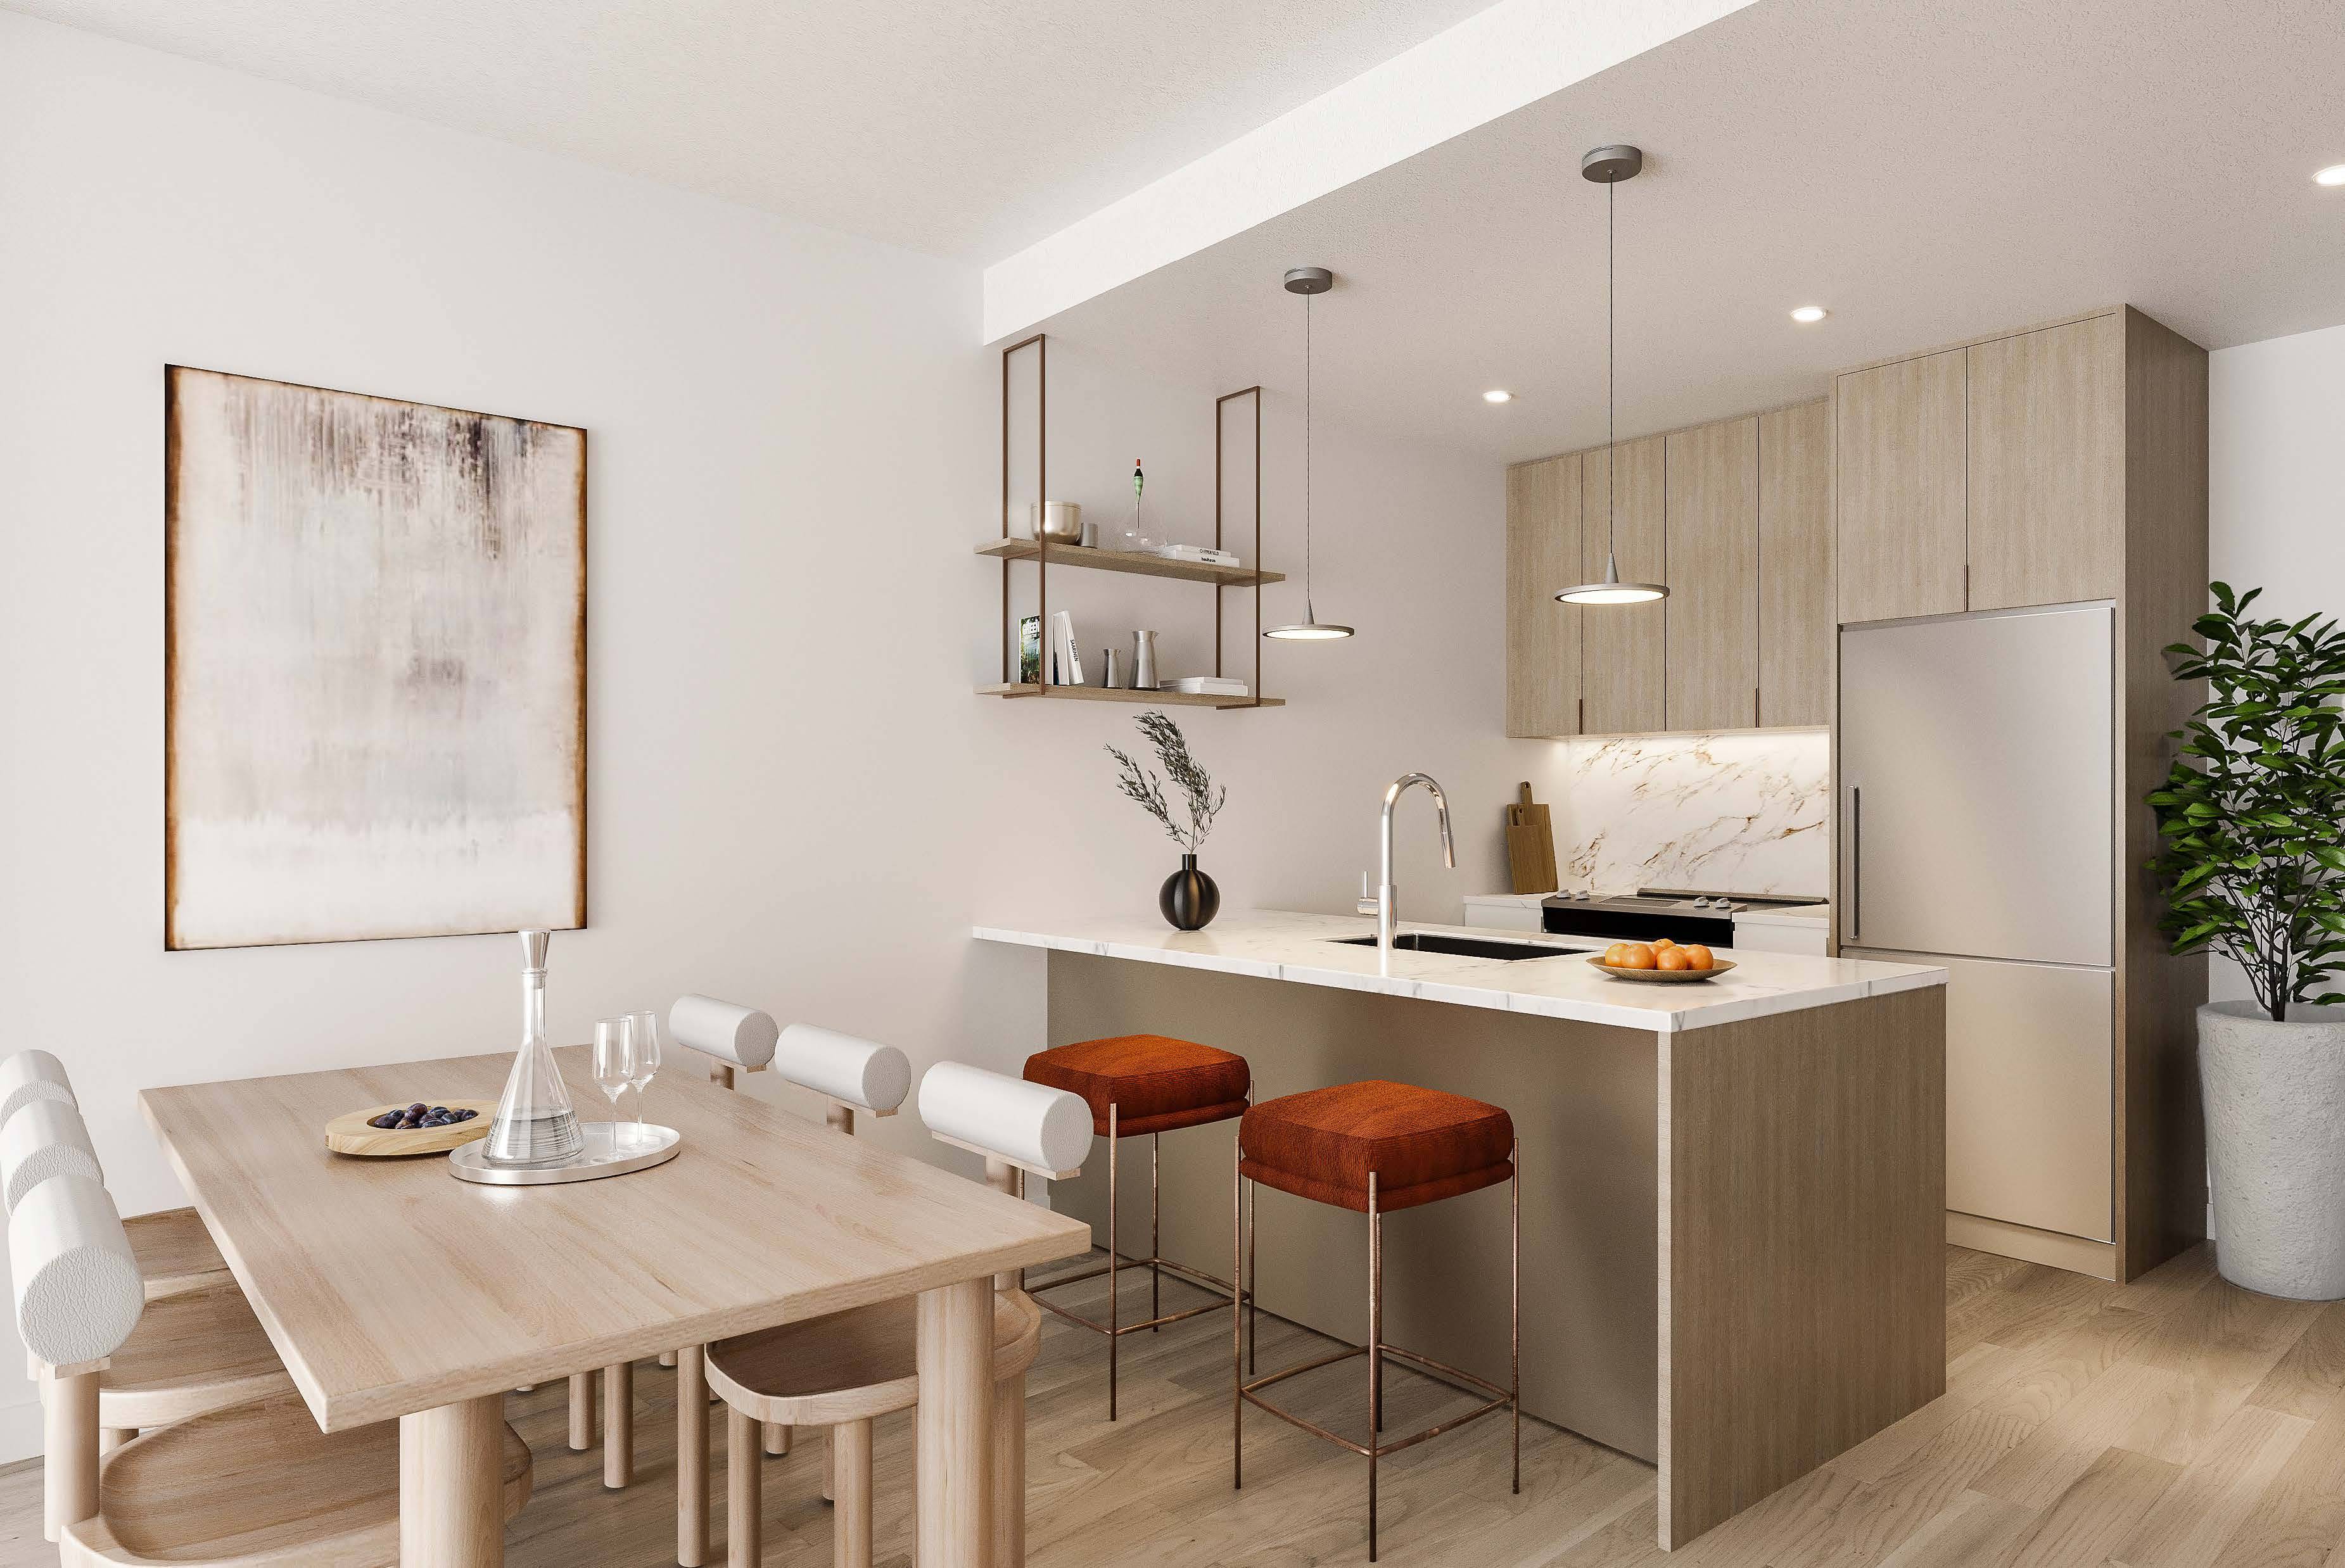 BRAND NEW, LUXURY 1 BEDROOM RENTAL WITH LOGGIA AT SIGNUM - 375 DEAN ST, BOERUM HILL, BROOKLYN